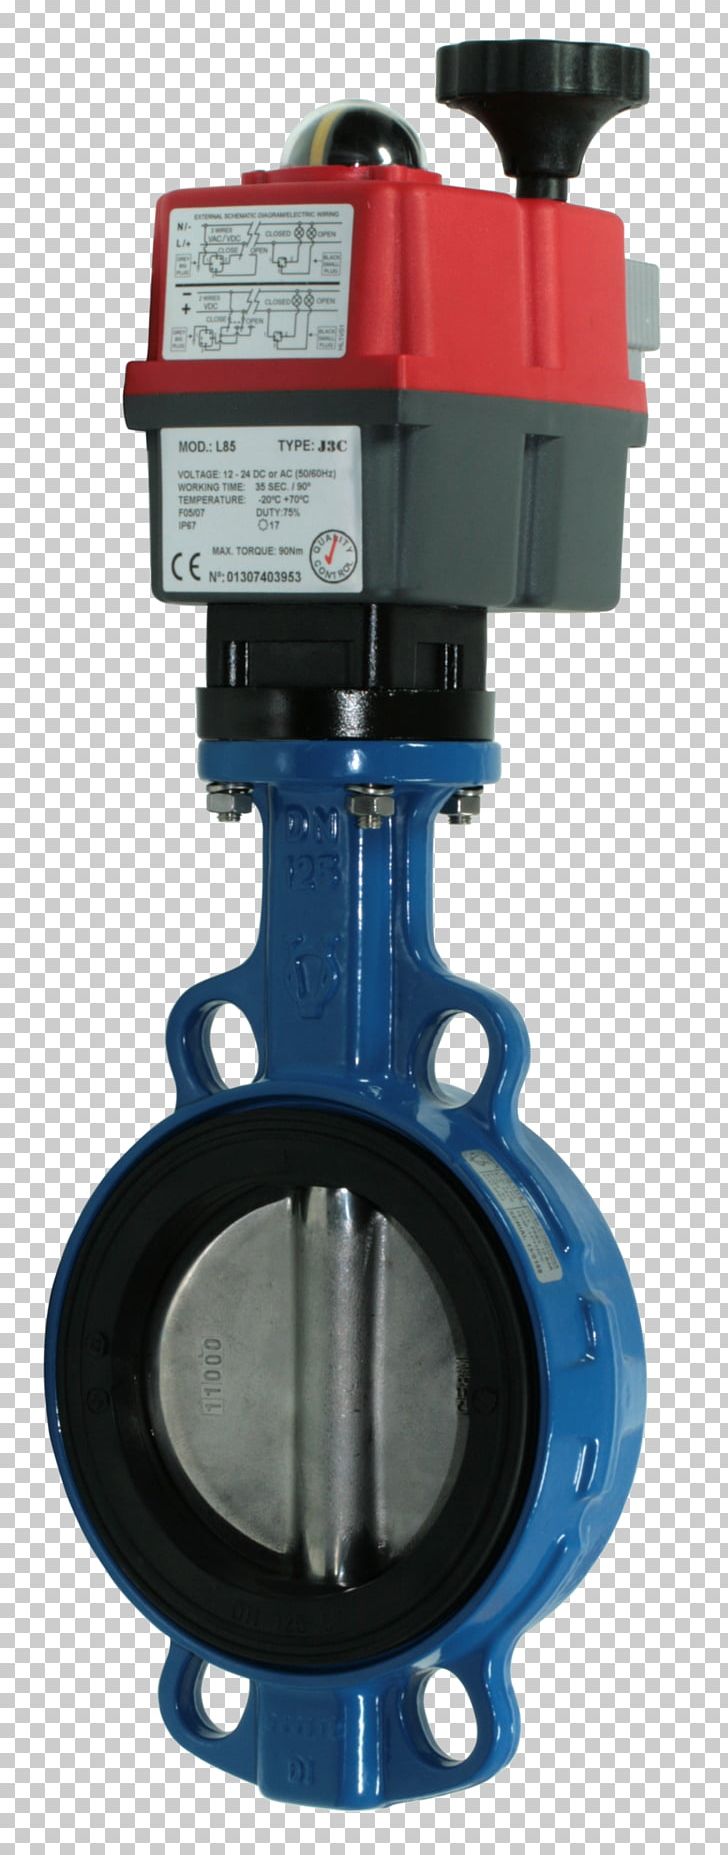 Butterfly Valve Gate Valve Ball Valve EPDM Rubber PNG, Clipart, Ball Valve, Butterfly Valve, Discreto E Continuo, Electricity, Epdm Rubber Free PNG Download